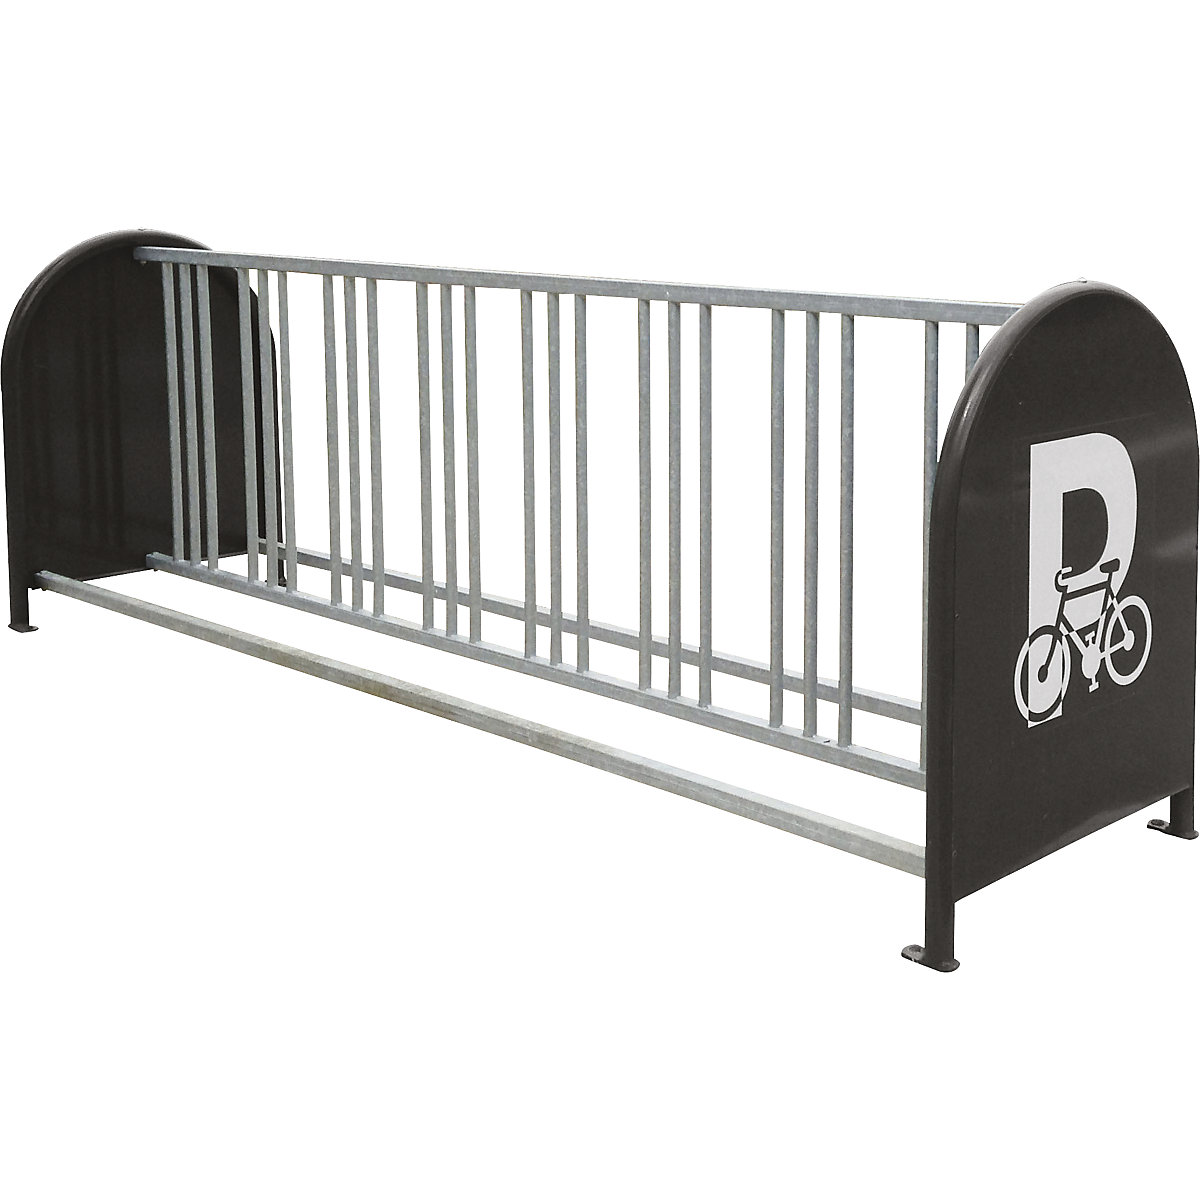 Bicycle rack with 16 parking spots - PROCITY